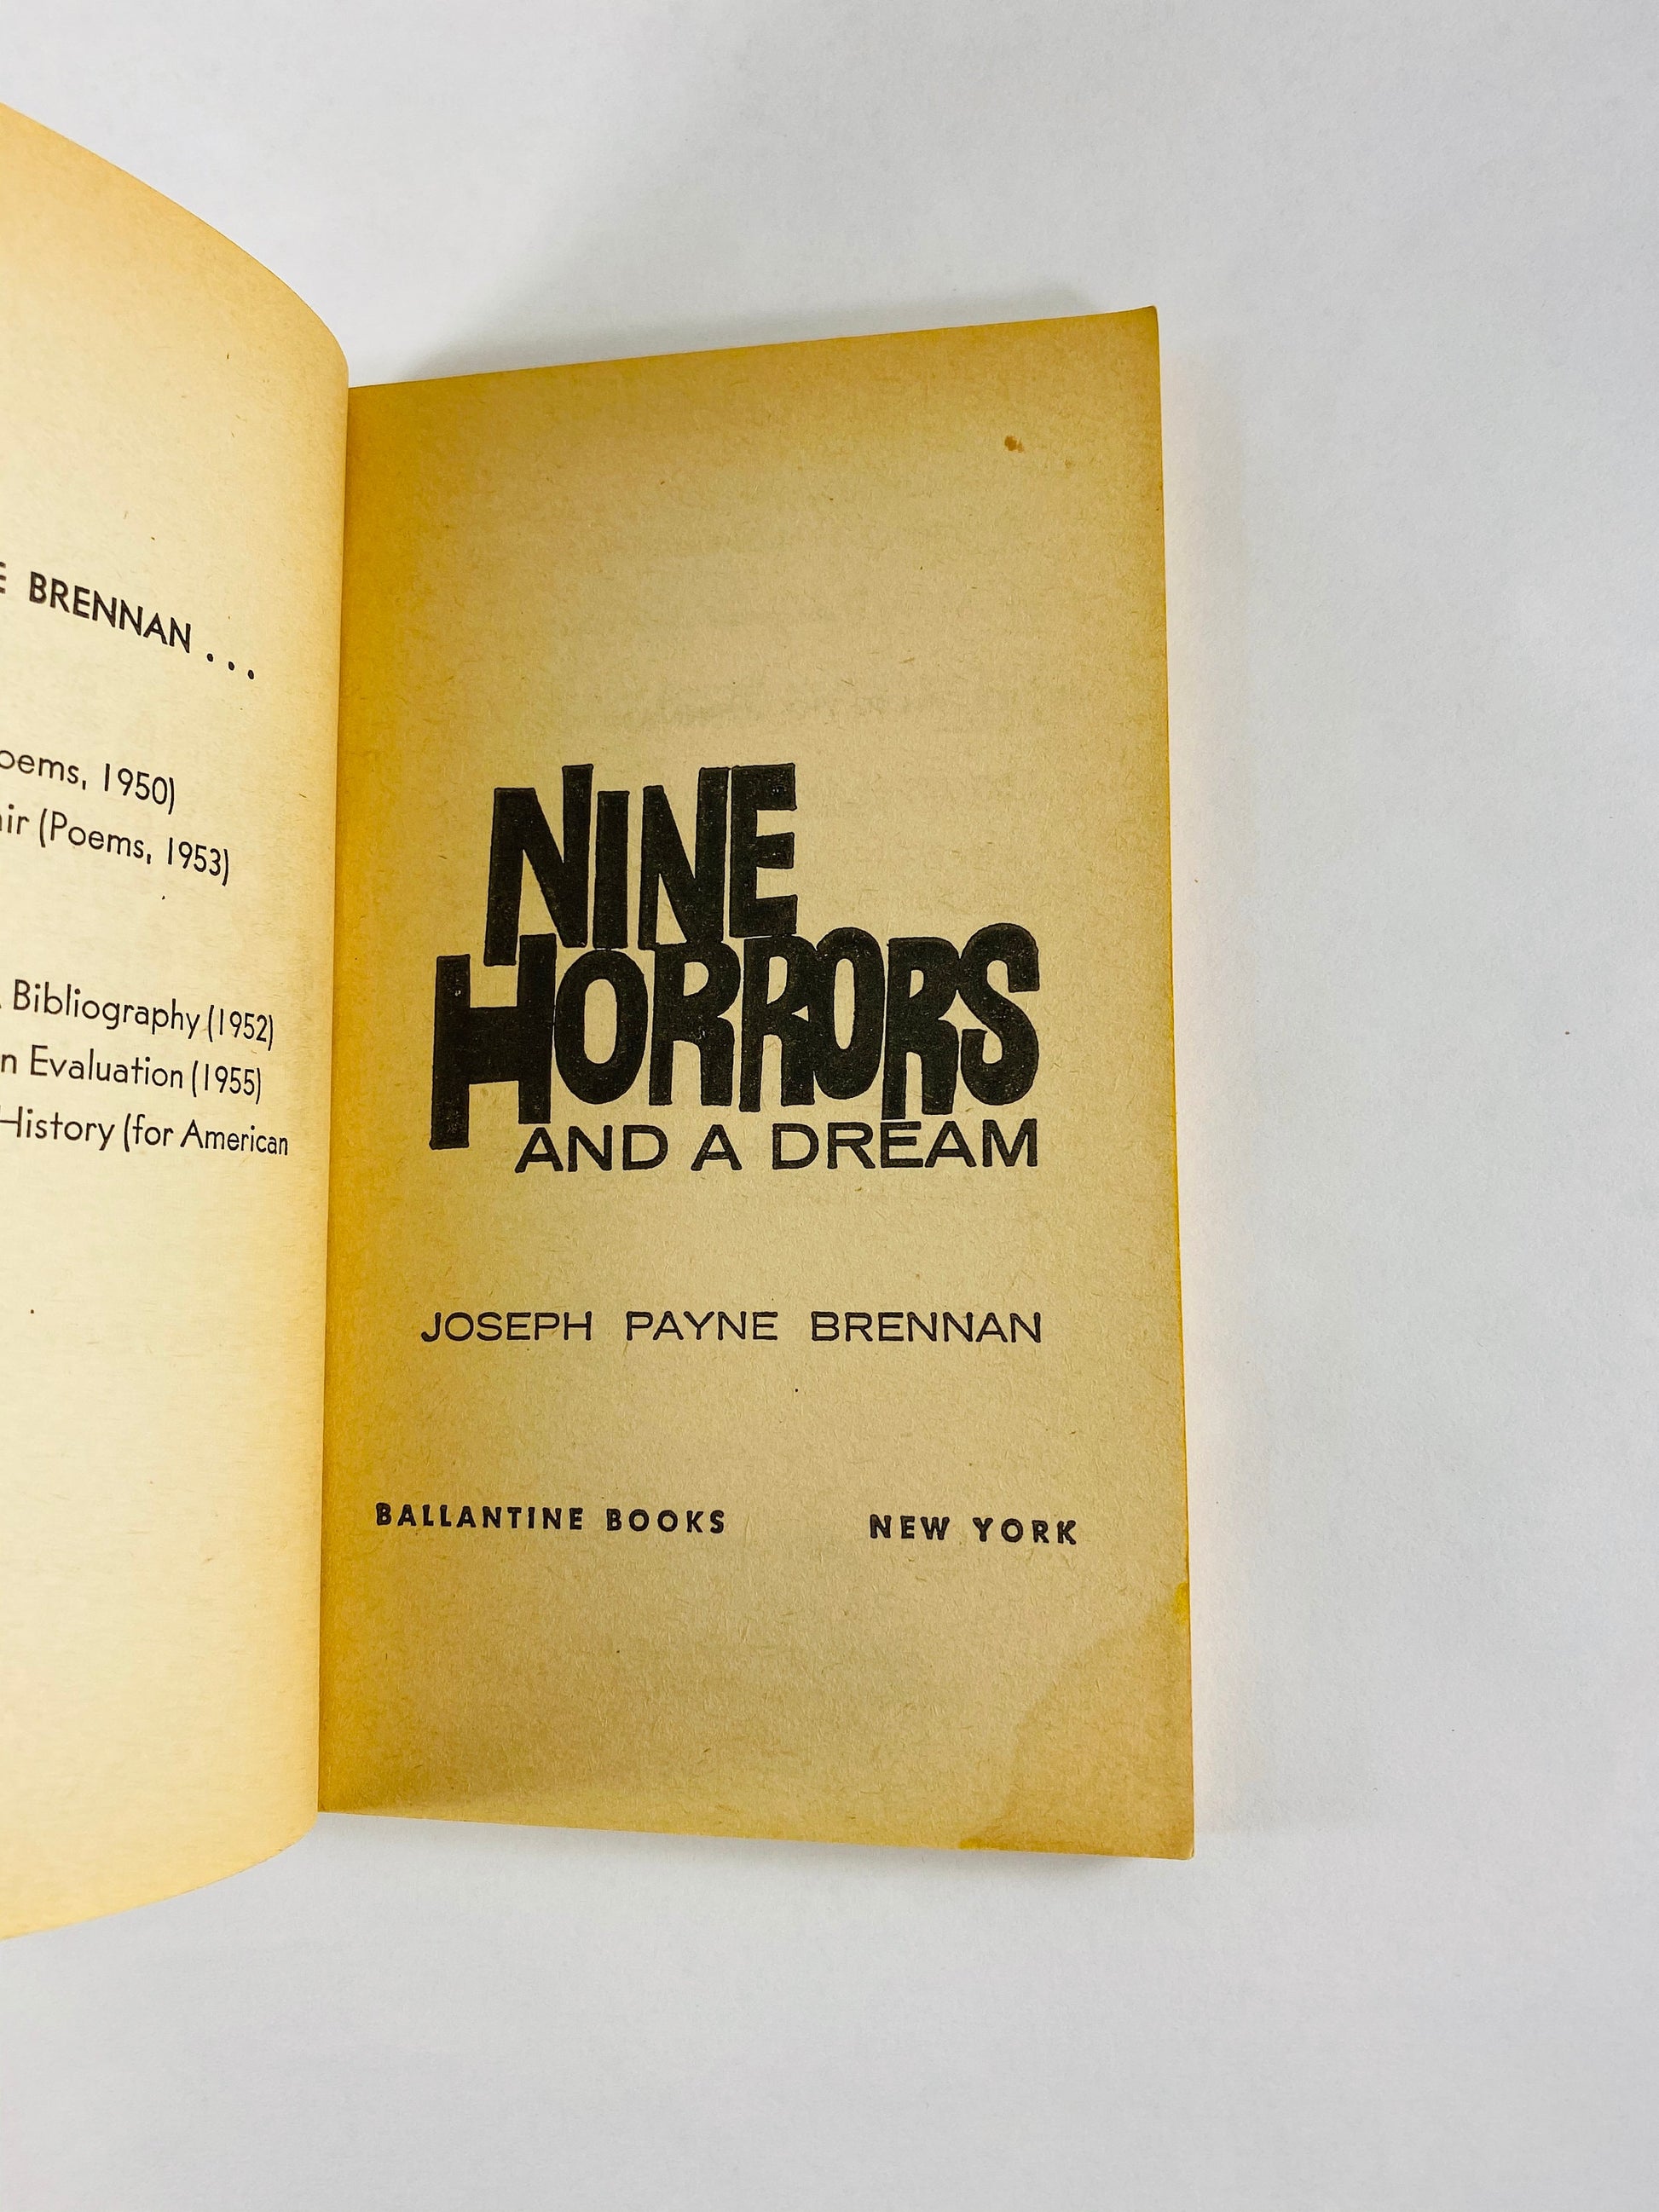 1958 Nine Horrors and a Dream Joseph Payne Brennan. Vintage paperback book acclaimed by Stephen King as master of the unashamed horror tale